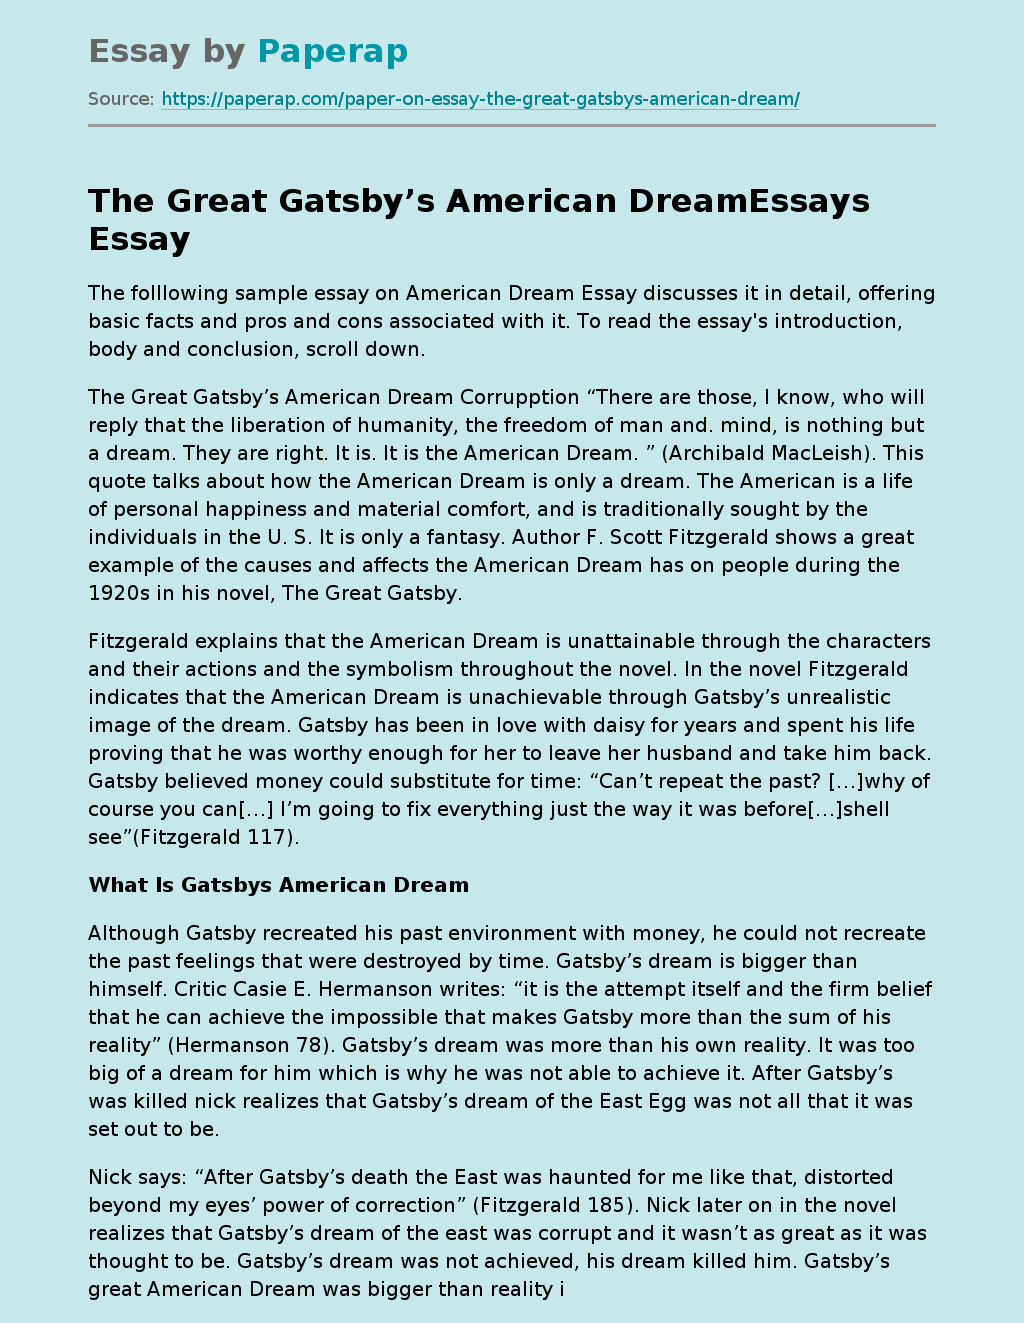 thesis statement for the great gatsby american dream